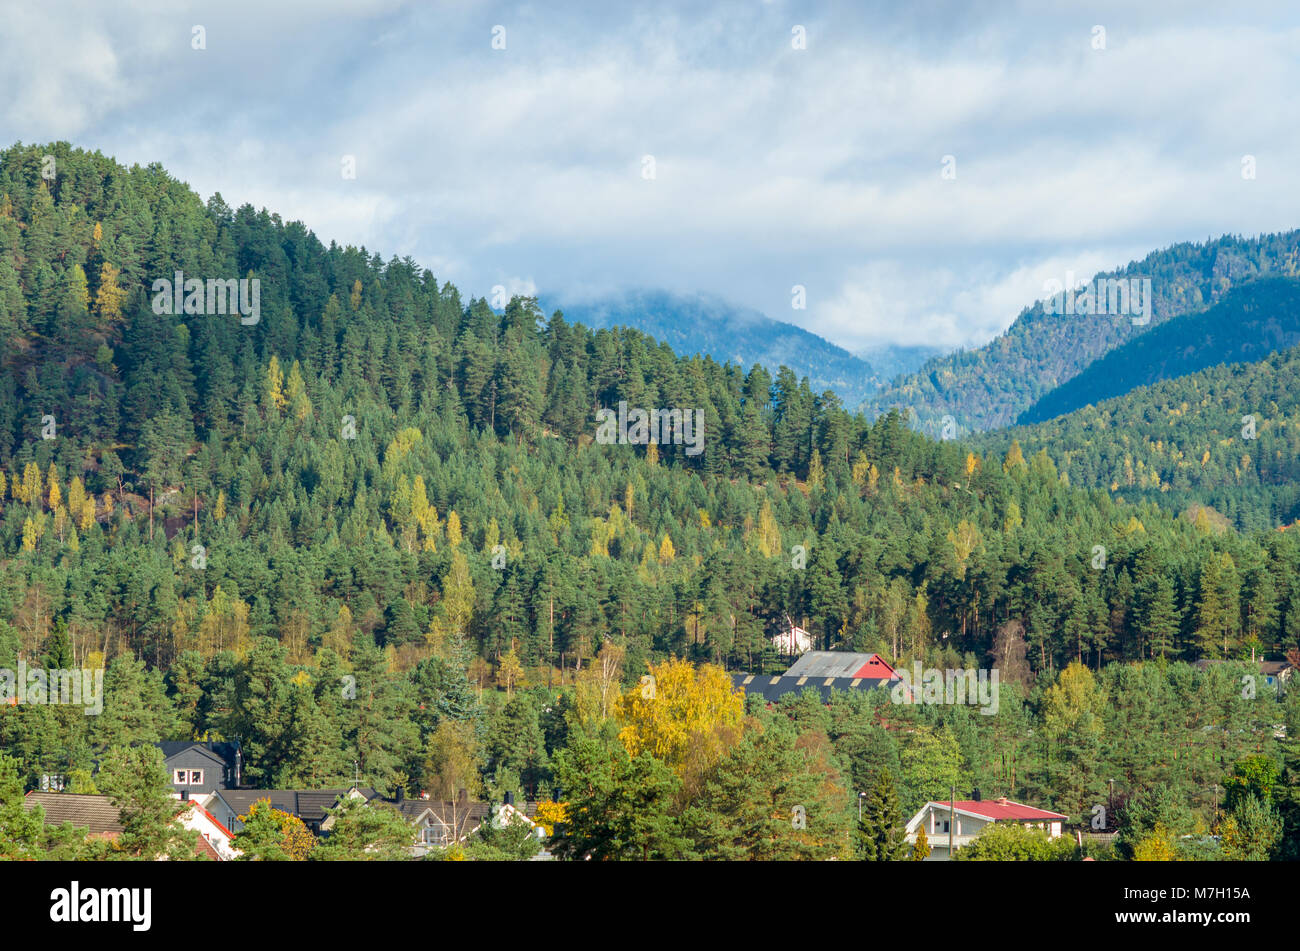 Landscape of central Norway midland with low mountains covered by forest. Evje, middle of Norway. Stock Photo